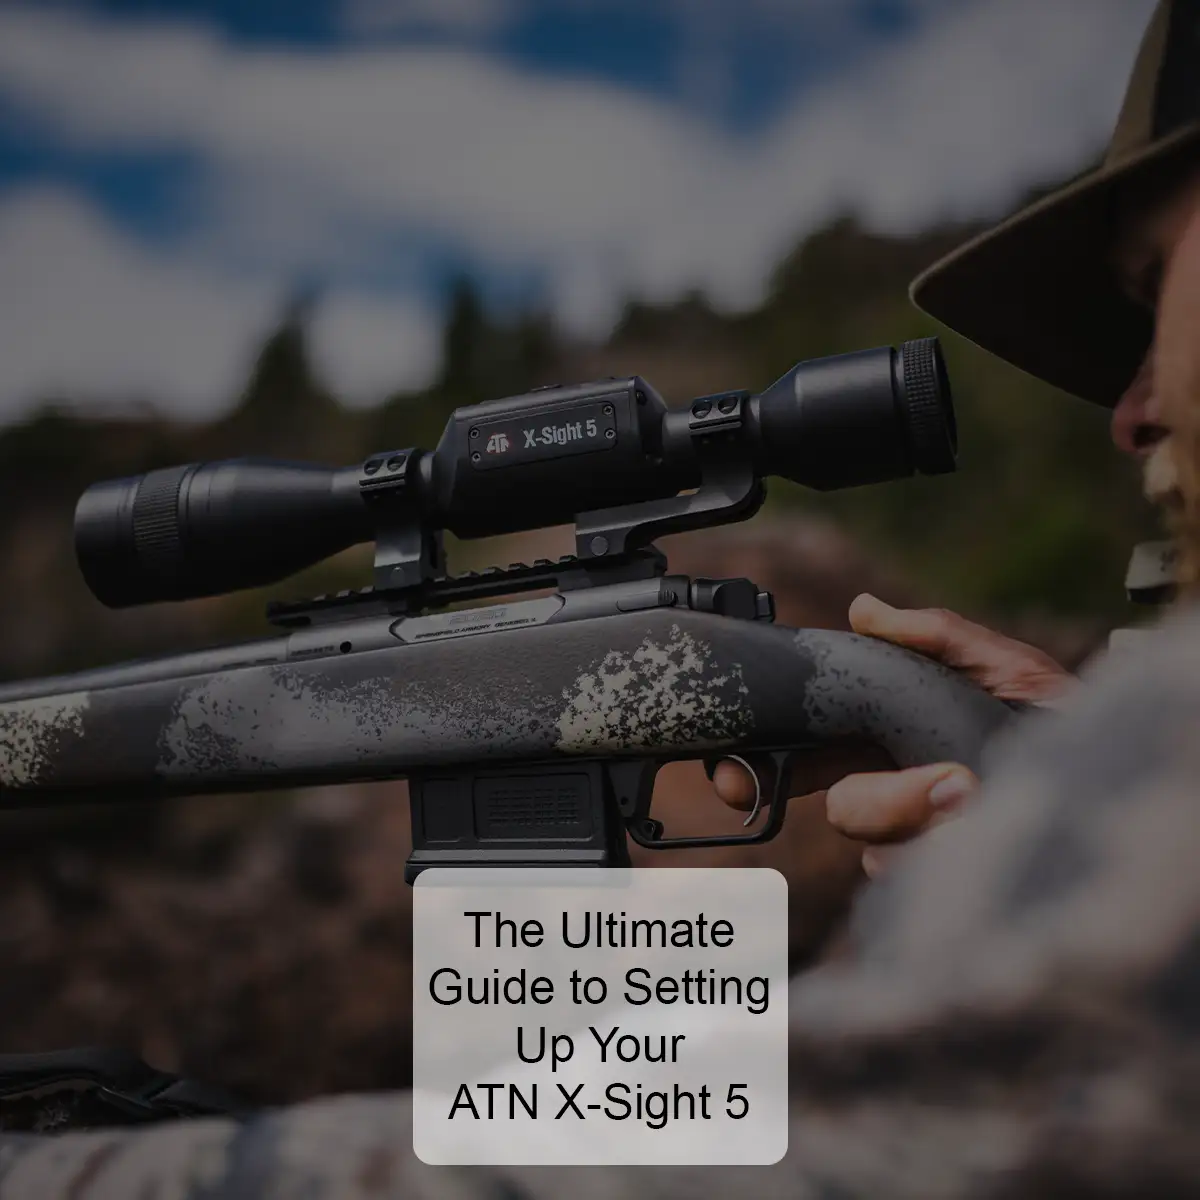 The Ultimate Guide to Setting Up Your ATN X-Sight 5